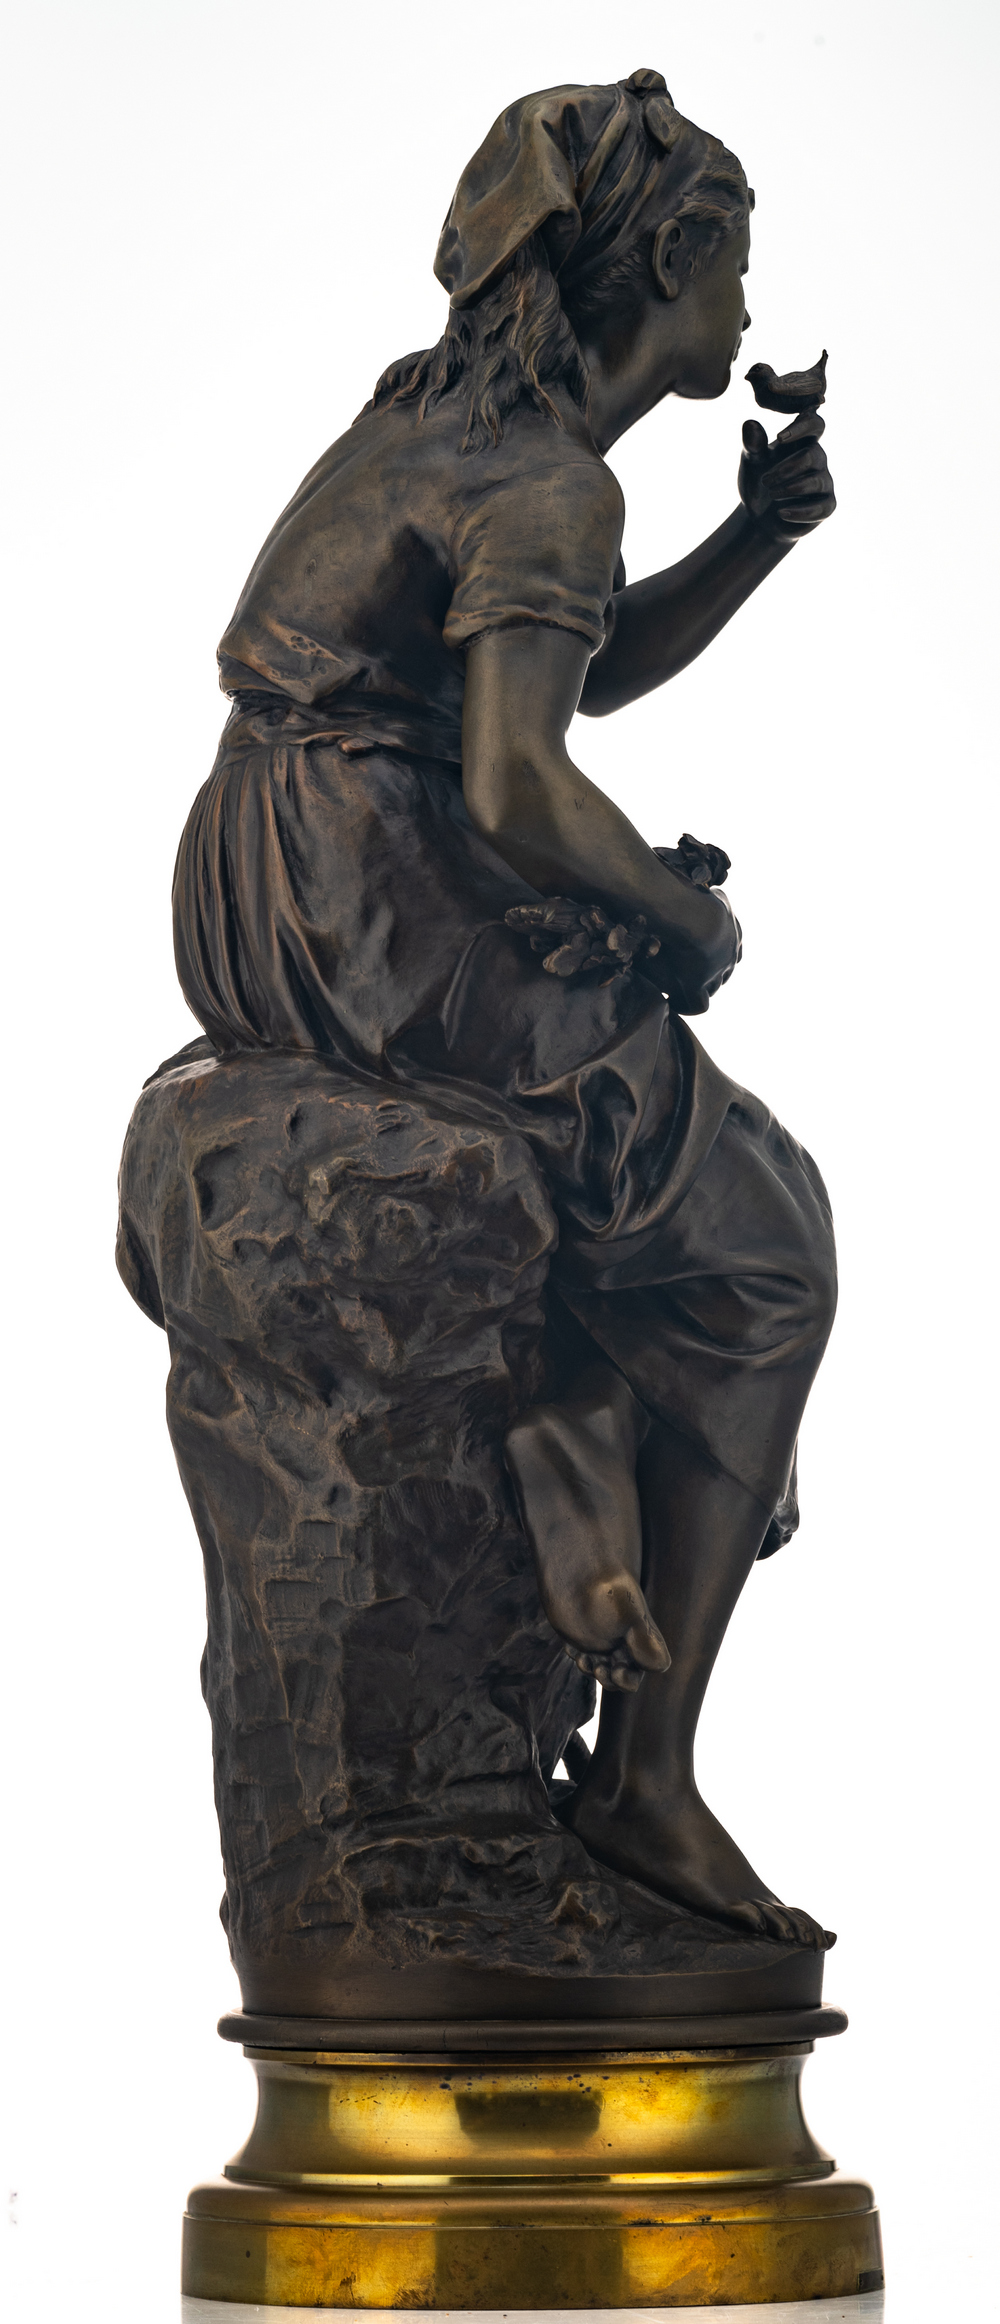 Moreau M., a maiden with birds, patinated bronze, H 78 cm - Image 4 of 7